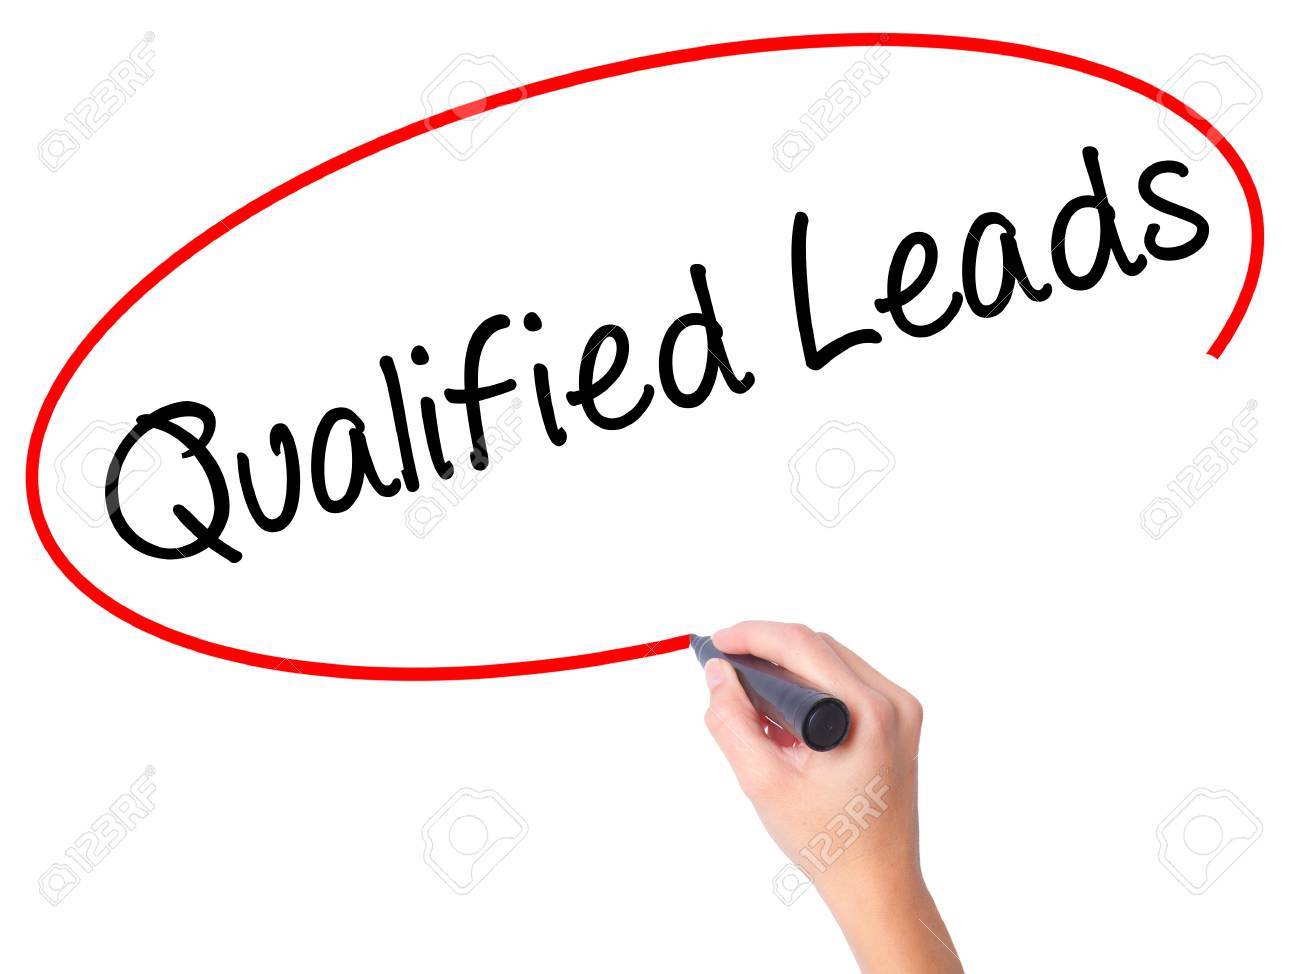 What is a qualified lead